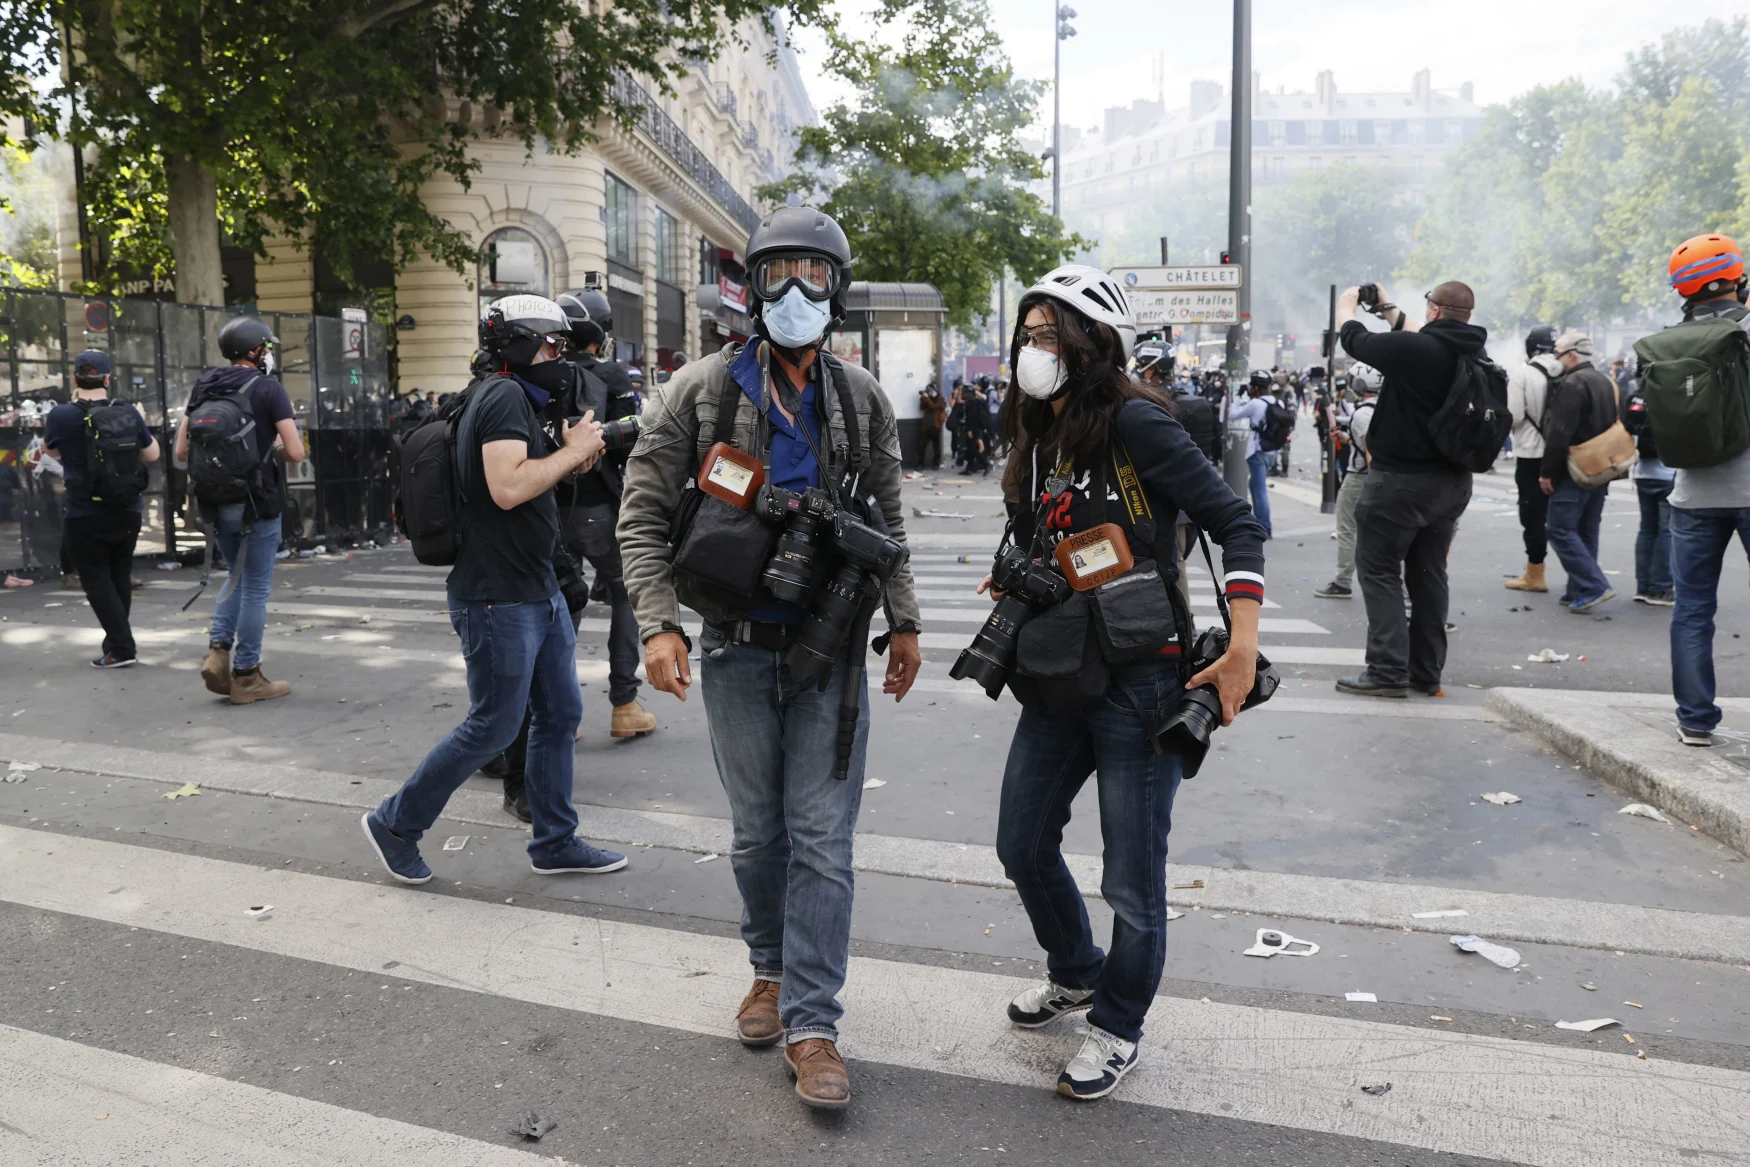 A photo shows AFP photographer Anne-Christine Poujoulat (R) and photographer Jean-Baptiste Autissier during a rally as part of the 'Black Lives Matter' worldwide protests against racism and police brutality, on Place de la Republique in Paris on June 13, 2020. - A wave of global protests in the wake of US George Floyd's fatal arrest magnified attention on the 2016 death in French police custody of Adama Traore, a 24-year-old black man, and renewed controversy over claims of racism and brutality within the force. (Photo by Thomas SAMSON / AFP) (Photo by THOMAS SAMSON/AFP via Getty Images)